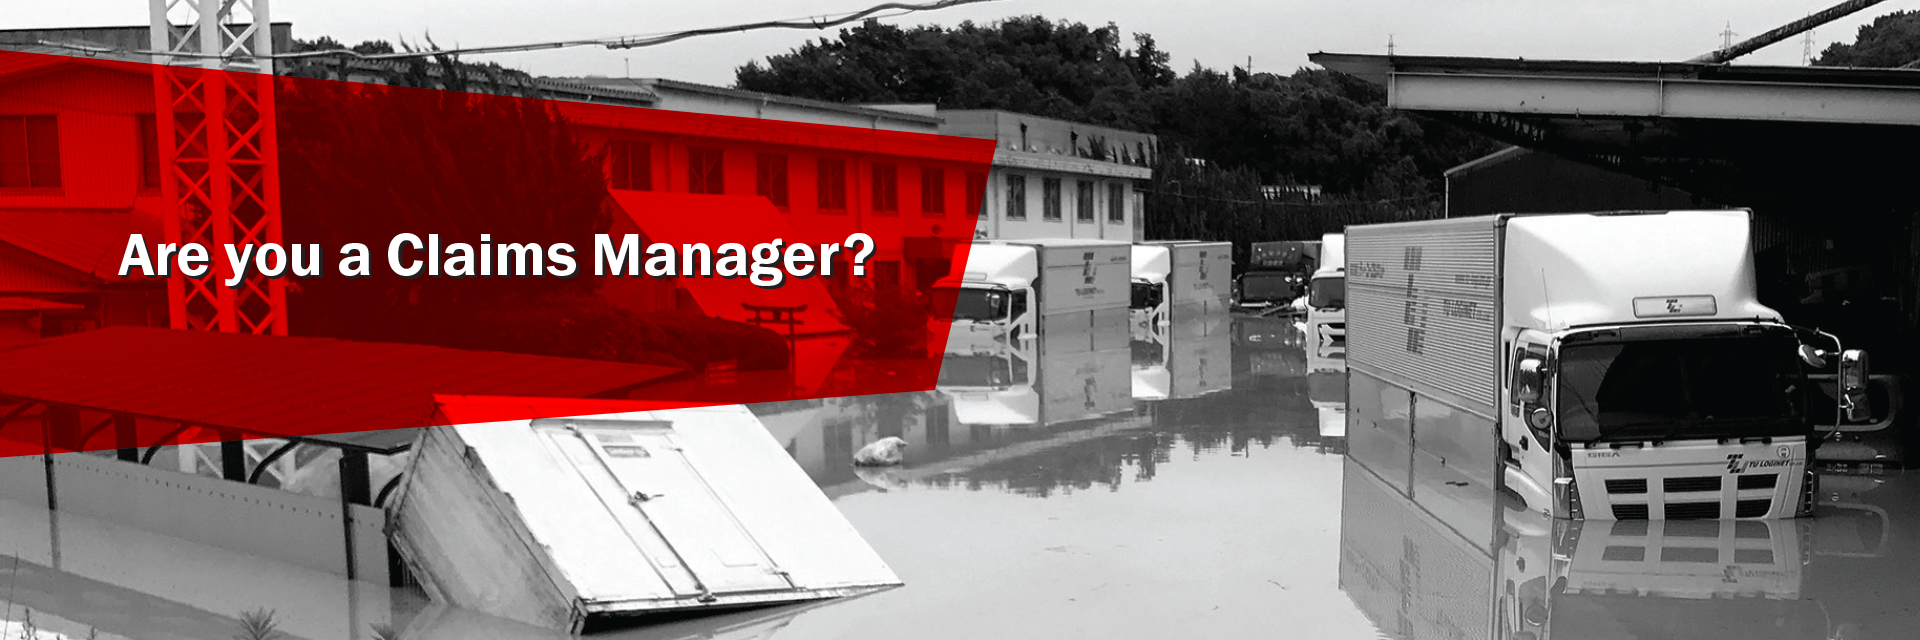 Are you a Claims Manager?